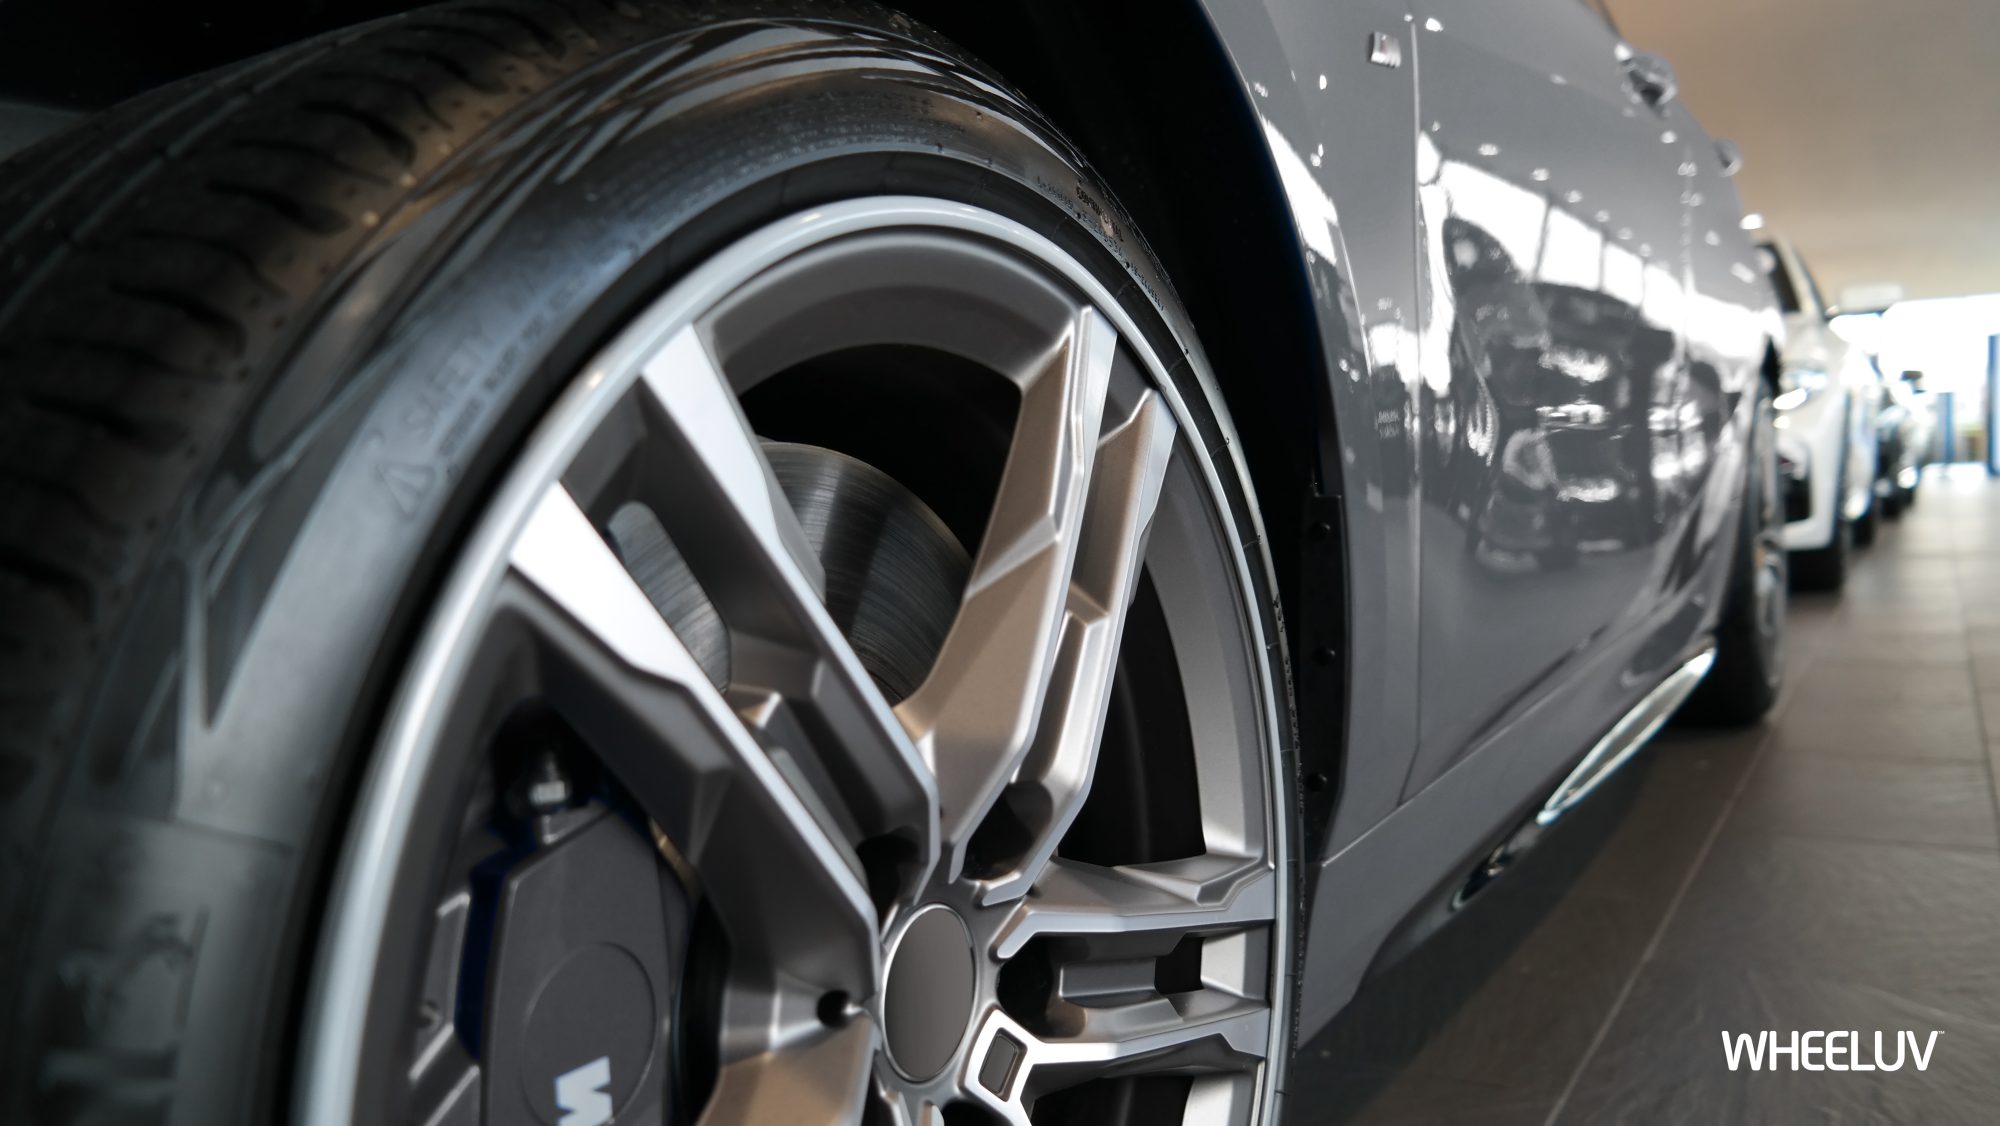 The photo shows a close up of an alloy wheel on a grey car in a showroom